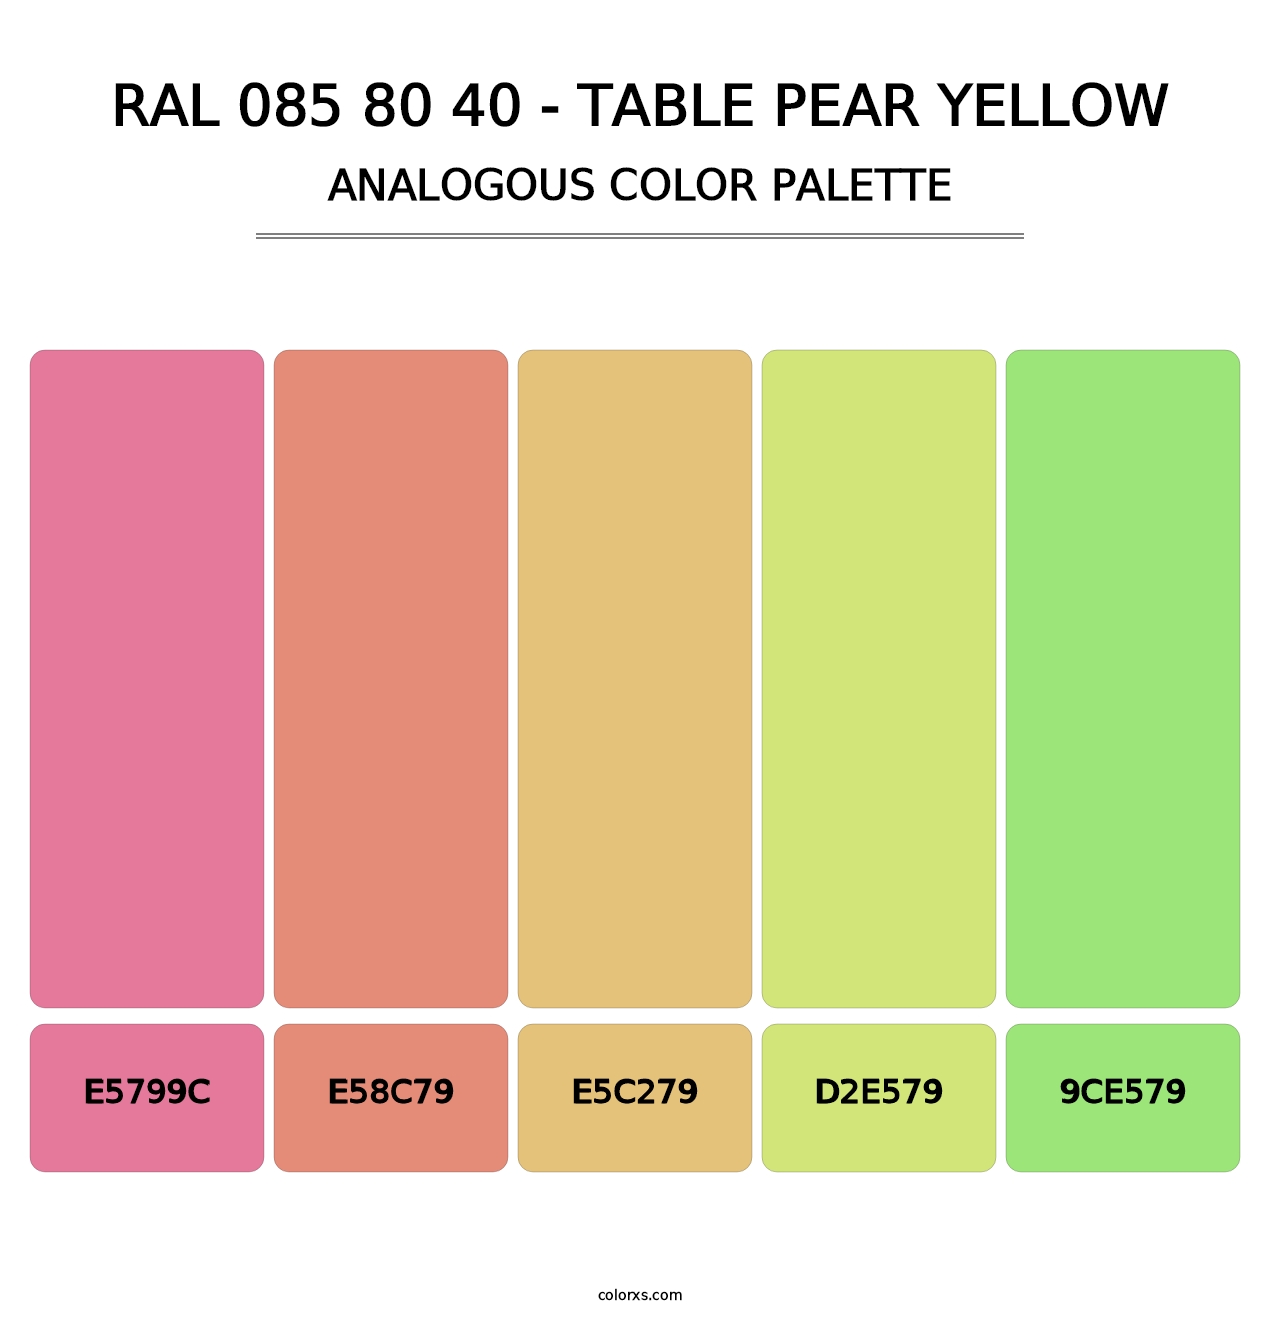 RAL 085 80 40 - Table Pear Yellow - Analogous Color Palette